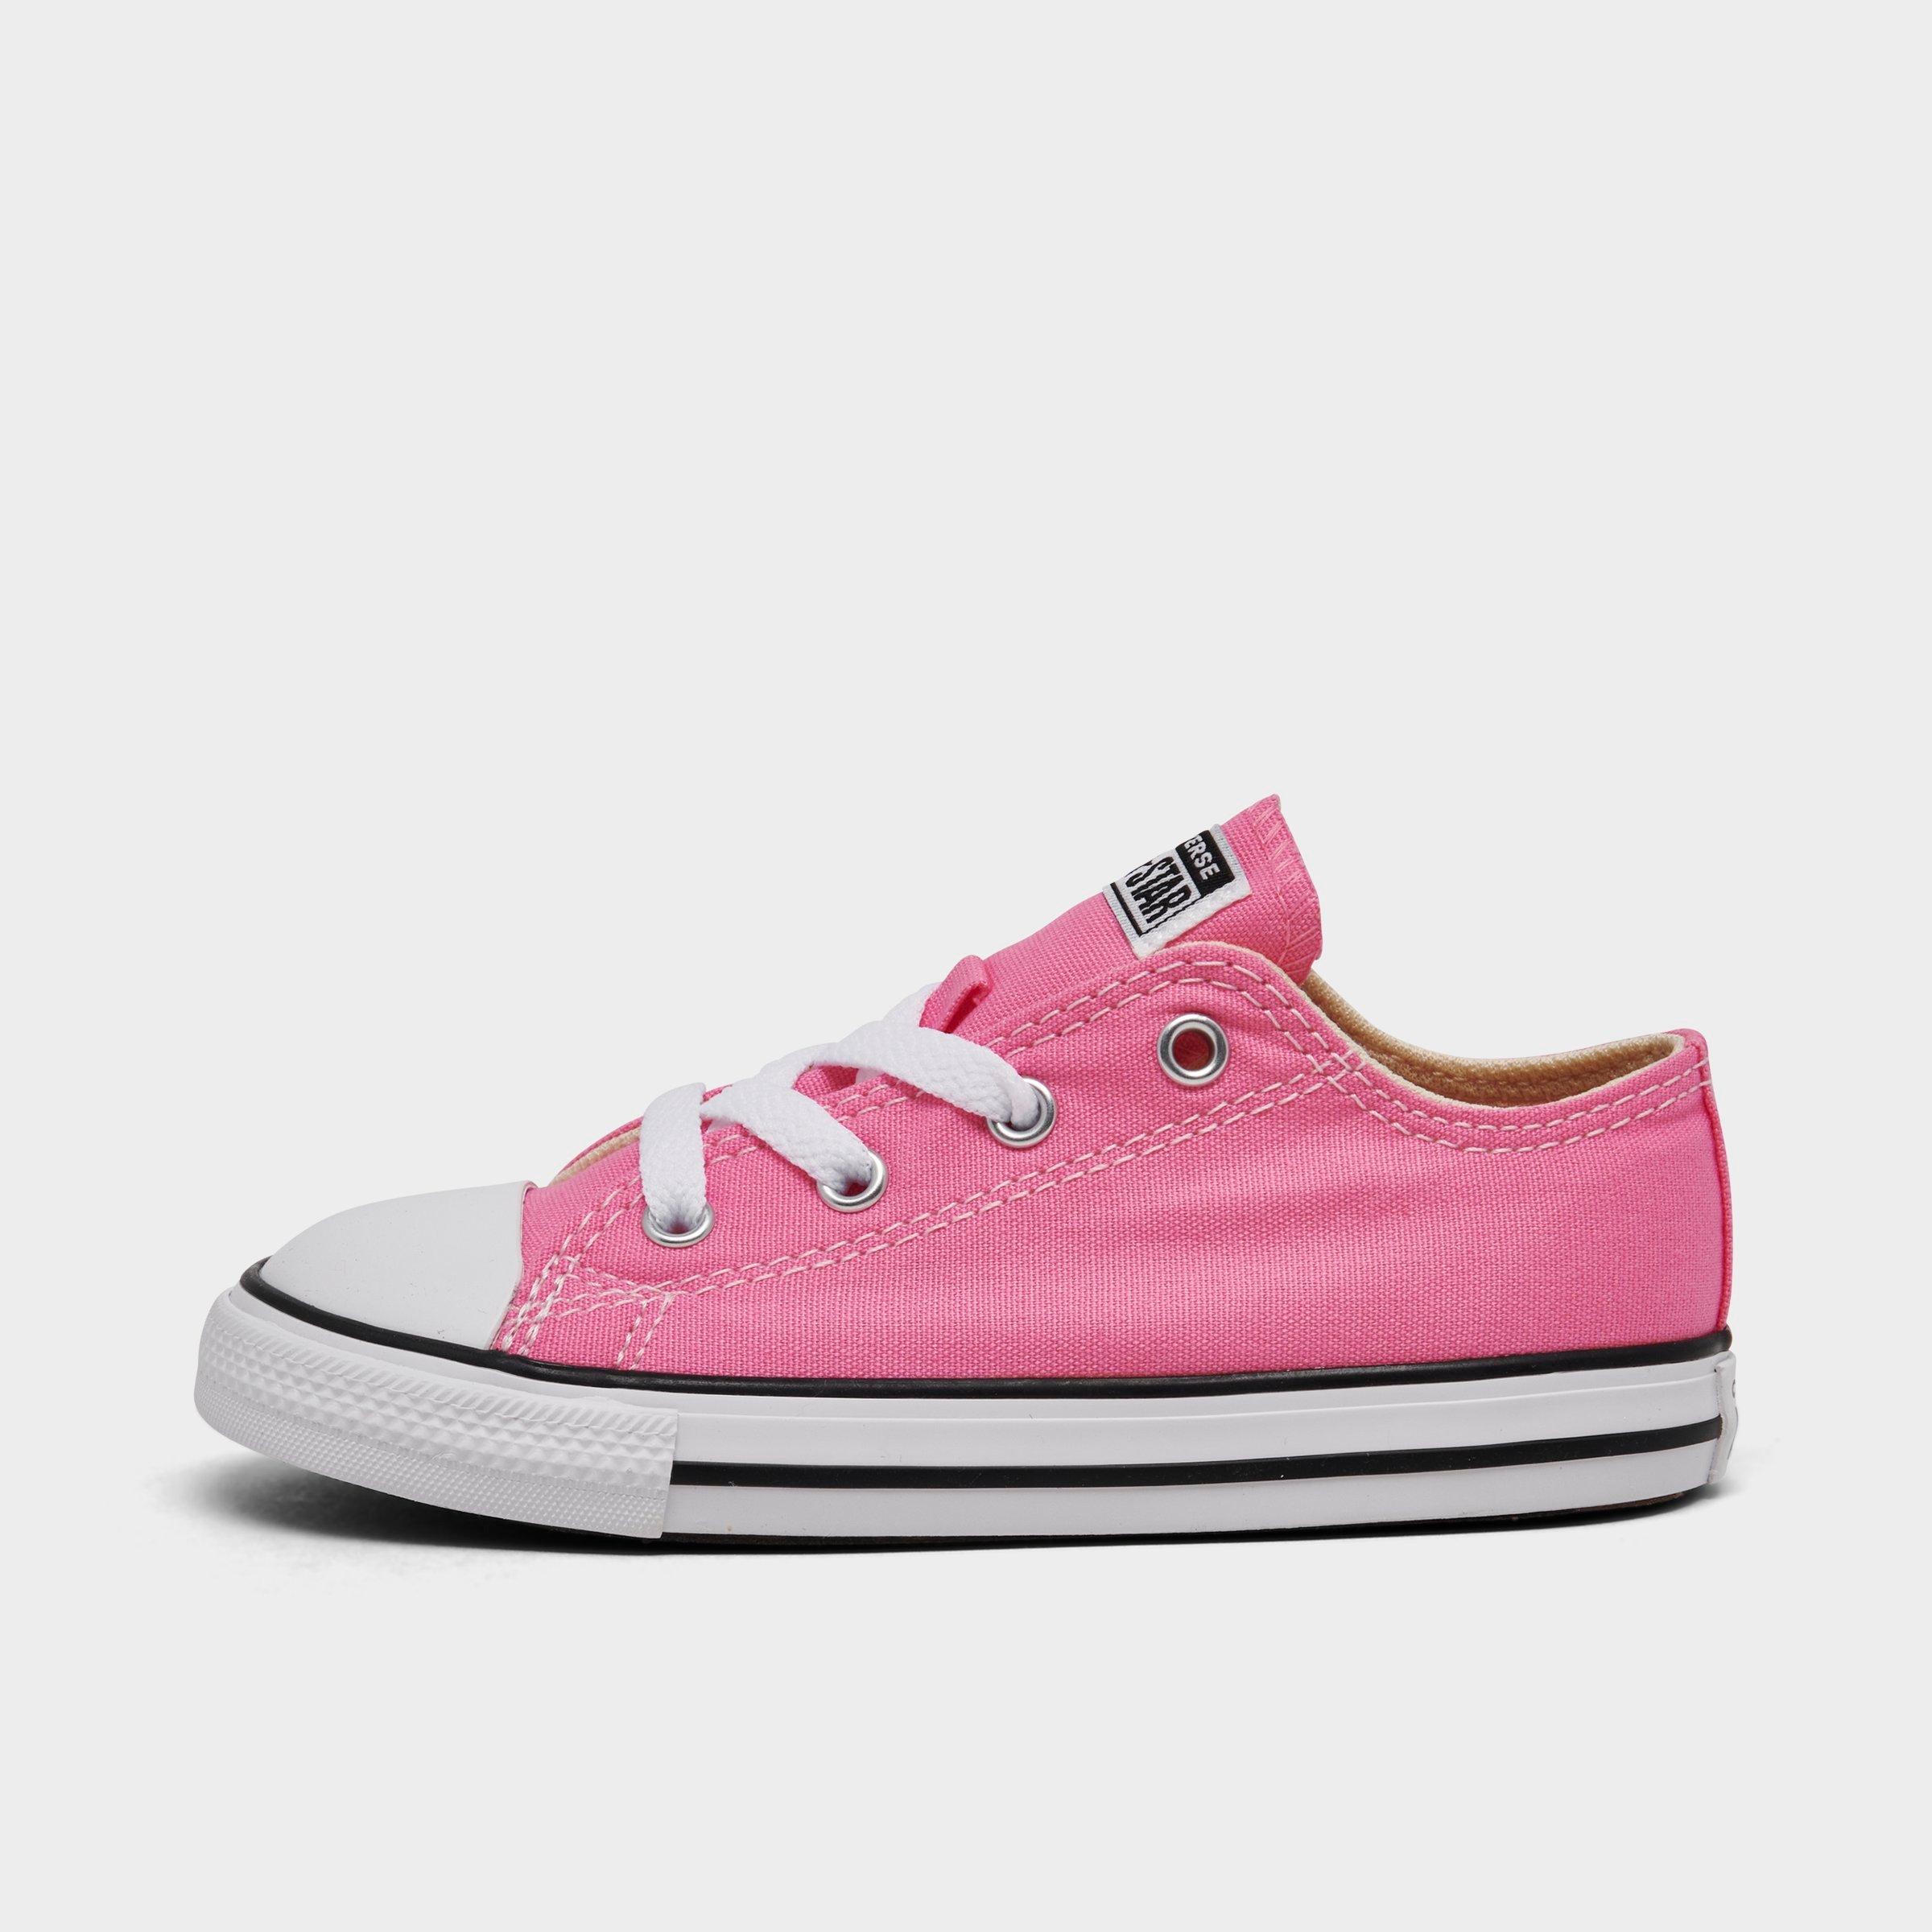 UPC 022866406345 product image for Converse Girls' Toddler Chuck Taylor Low Top Casual Shoes in Pink/Pink Size 6.0  | upcitemdb.com